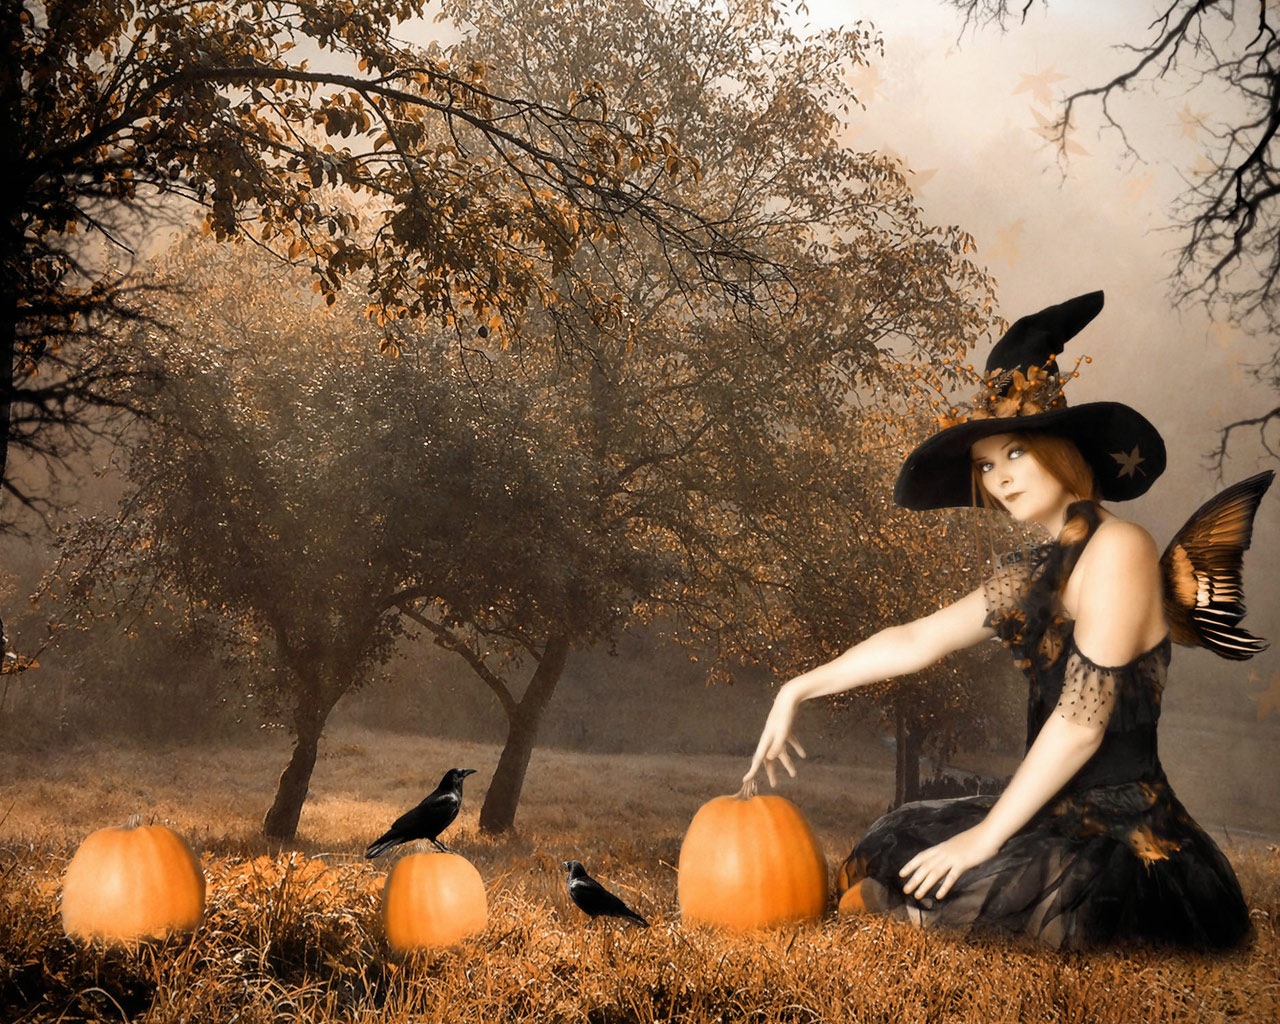 Halloween Witch Desktop Backgrounds Images Pictures   Becuo 1280x1024